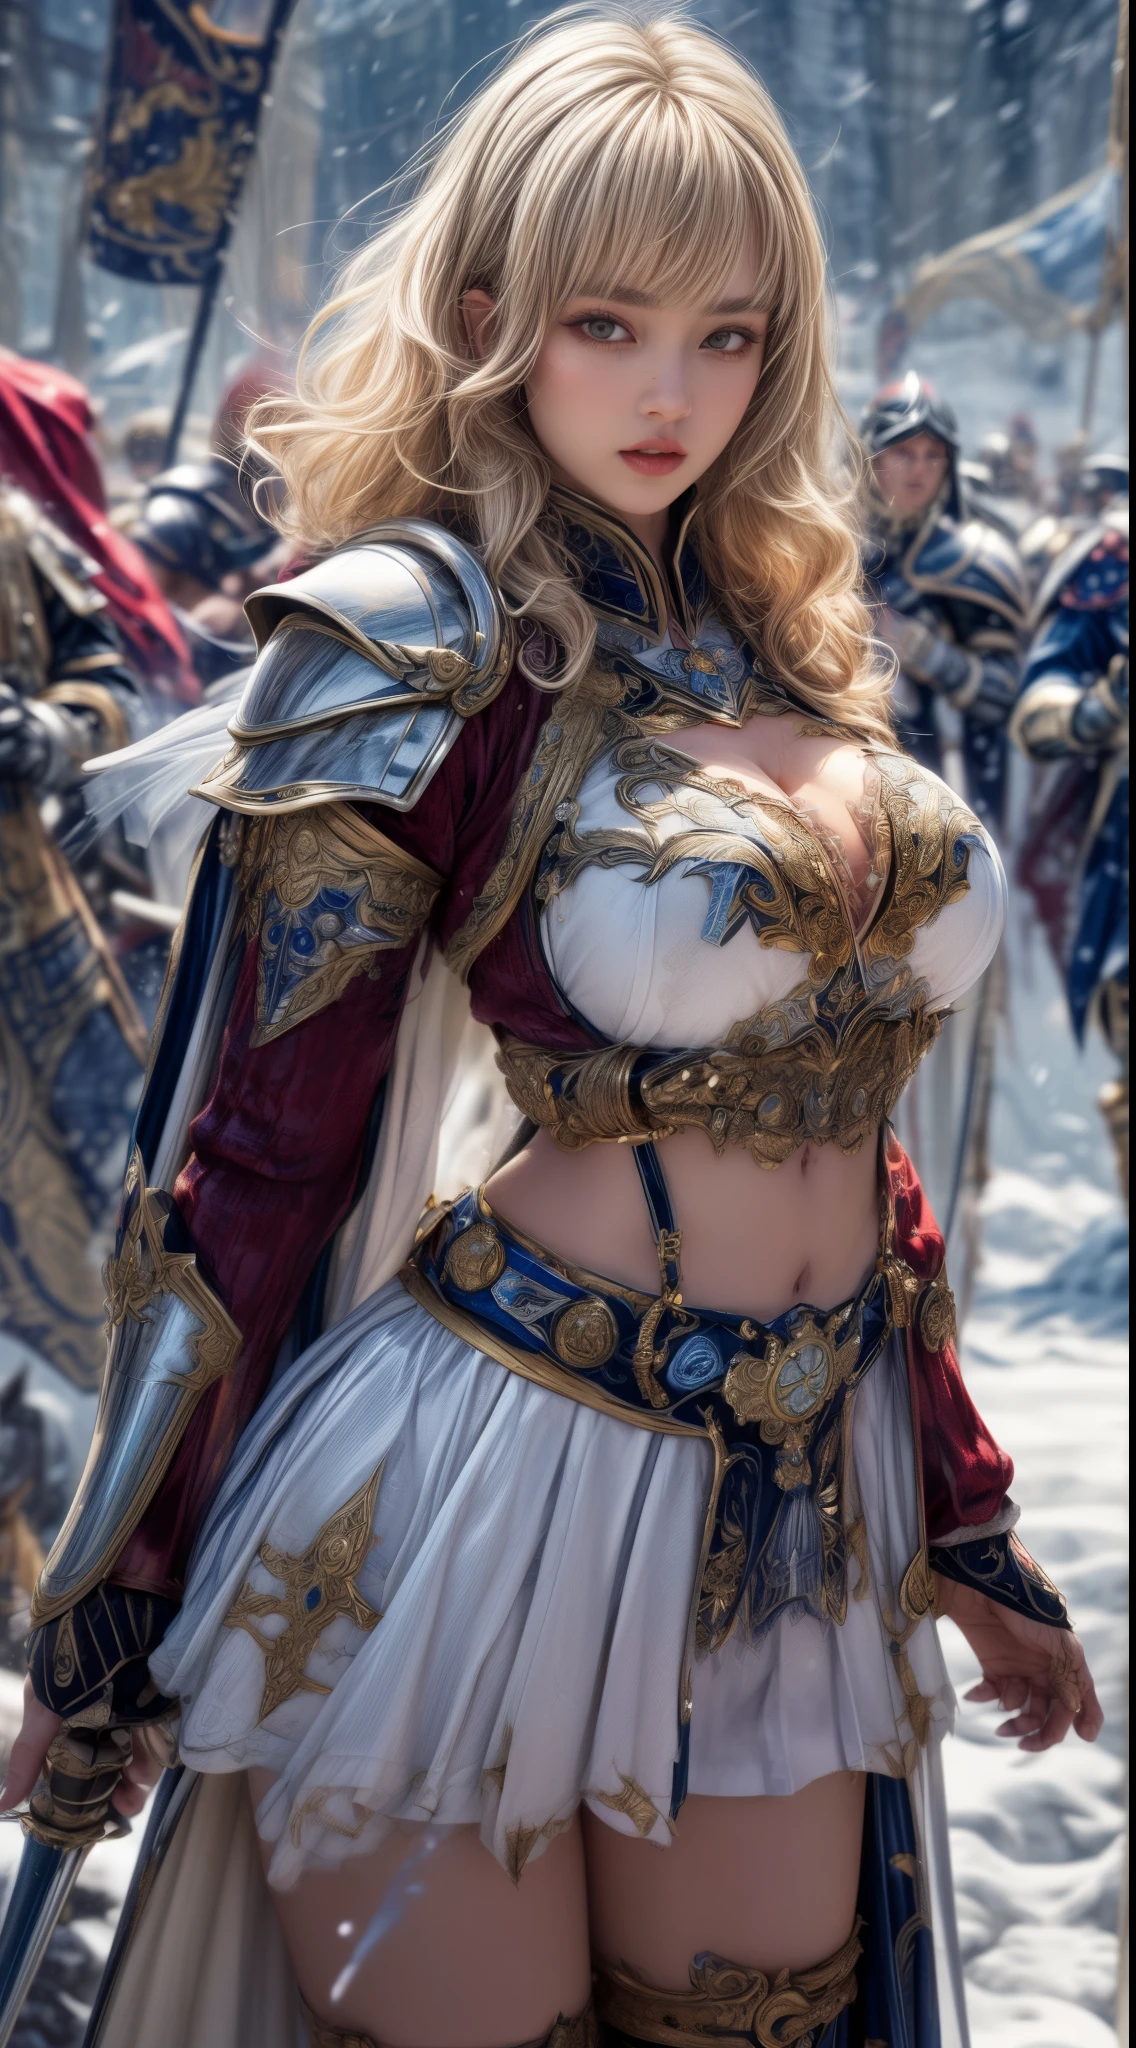 Very beautiful woman、Slender women、(Detailed face)、Realistic Skin、((holy knight)), ((Pearl White Armor))、((((Black armor with very fine and intricate decoration:1.1))))、((Delicate photo))，(Girl Astepeace RAW Photo Details:1.25), (highest quality:1.6), (超A high resolution:1.5), (Realistic:1.75), 8K resolution, Canon EOS R5, 50mm, Absurd, Ultra-detailed,Cinema Lighting,((battlefield))、((battle))、(((White skirt with embellishments)))、Thigh-high socks、Shin Guards、((Blonde))、((Curly Hair))、((Drill Hair))、((Wavy short hair with bangs,))、Get six-pack、Cape、Beautiful Armor、(((Has a huge weapon)))、(In combat)、The wind is blowing、((Symmetrical Armor))、((((Blizzard))))、(((Leading a large group of knights:1.2)))、Banner、Armor with a snow and ice motif、(((Battle Scene)))、((nsfw:1.1))、(Underwear visible)